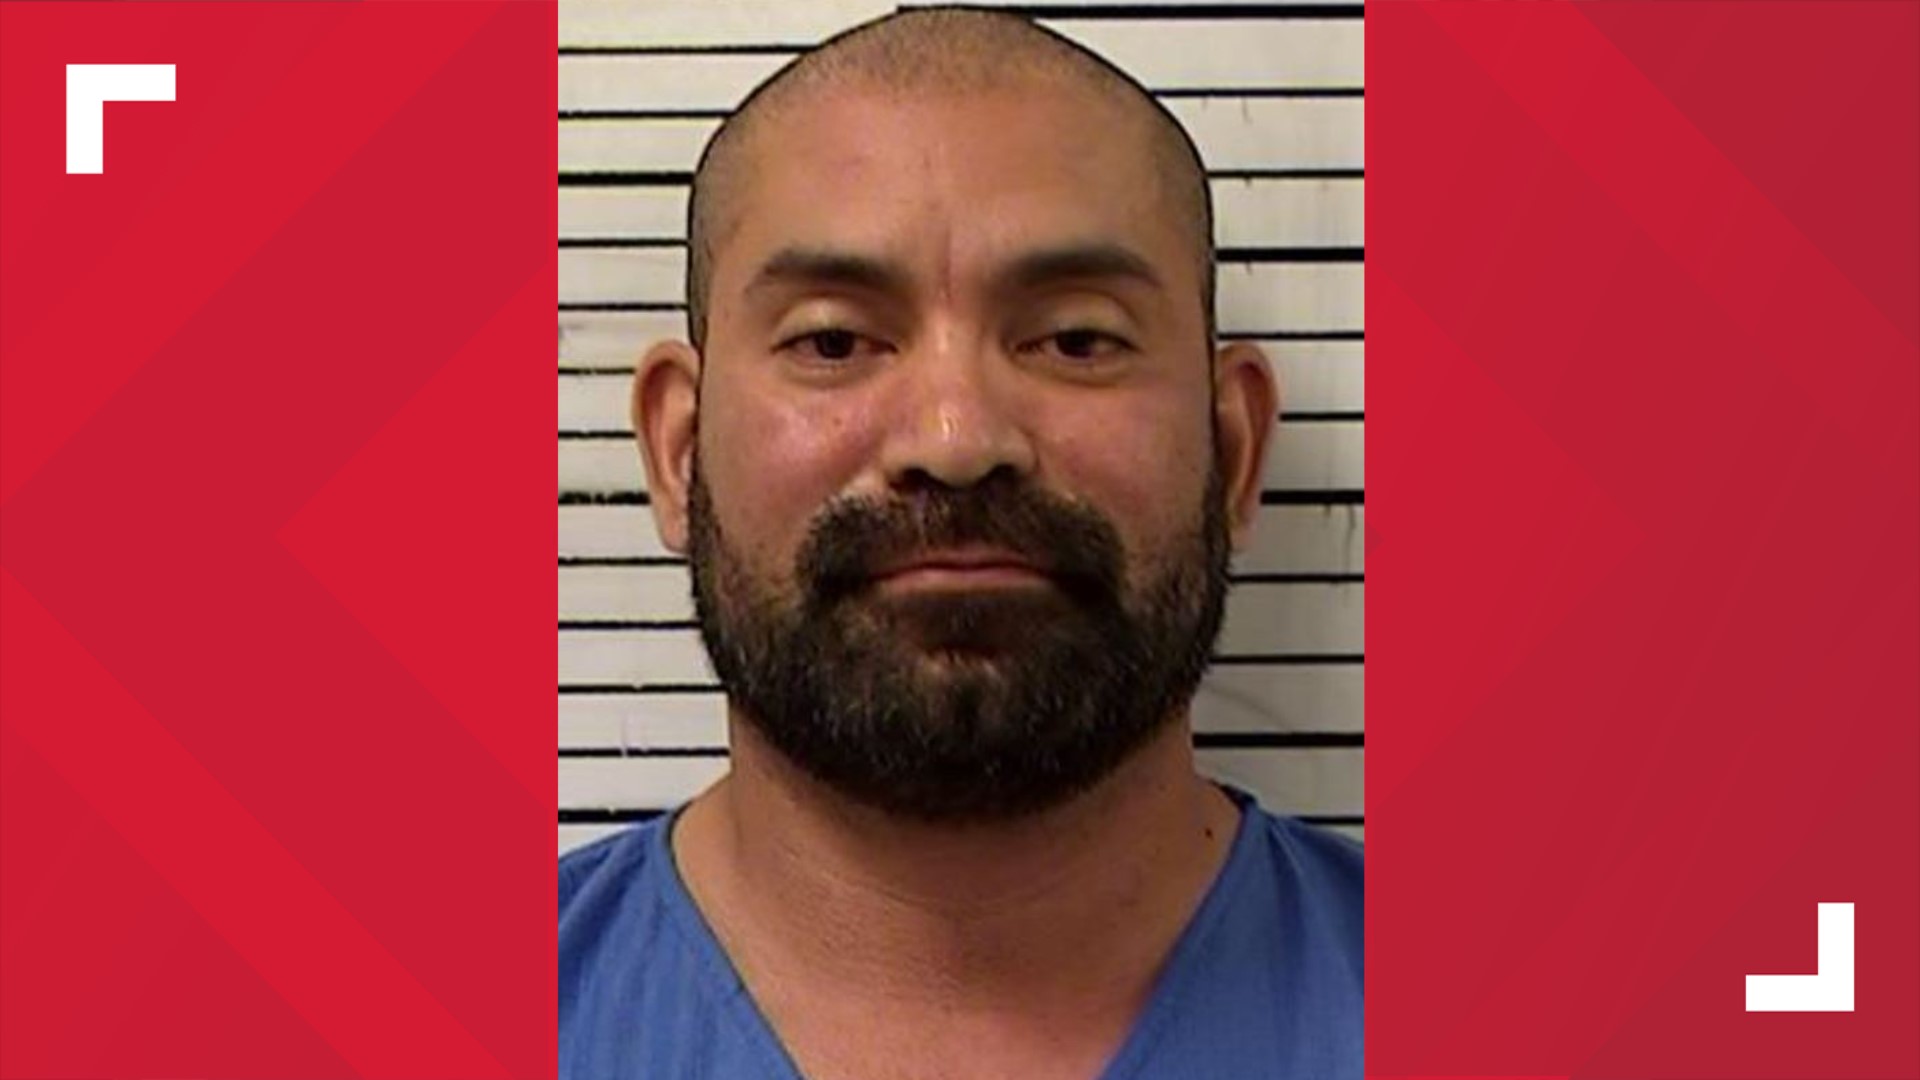 Marco Merino pleaded guilty to conspiring to distribute more than eight kilograms of fentanyl and accepting bribes to protect the transportation of cocaine.